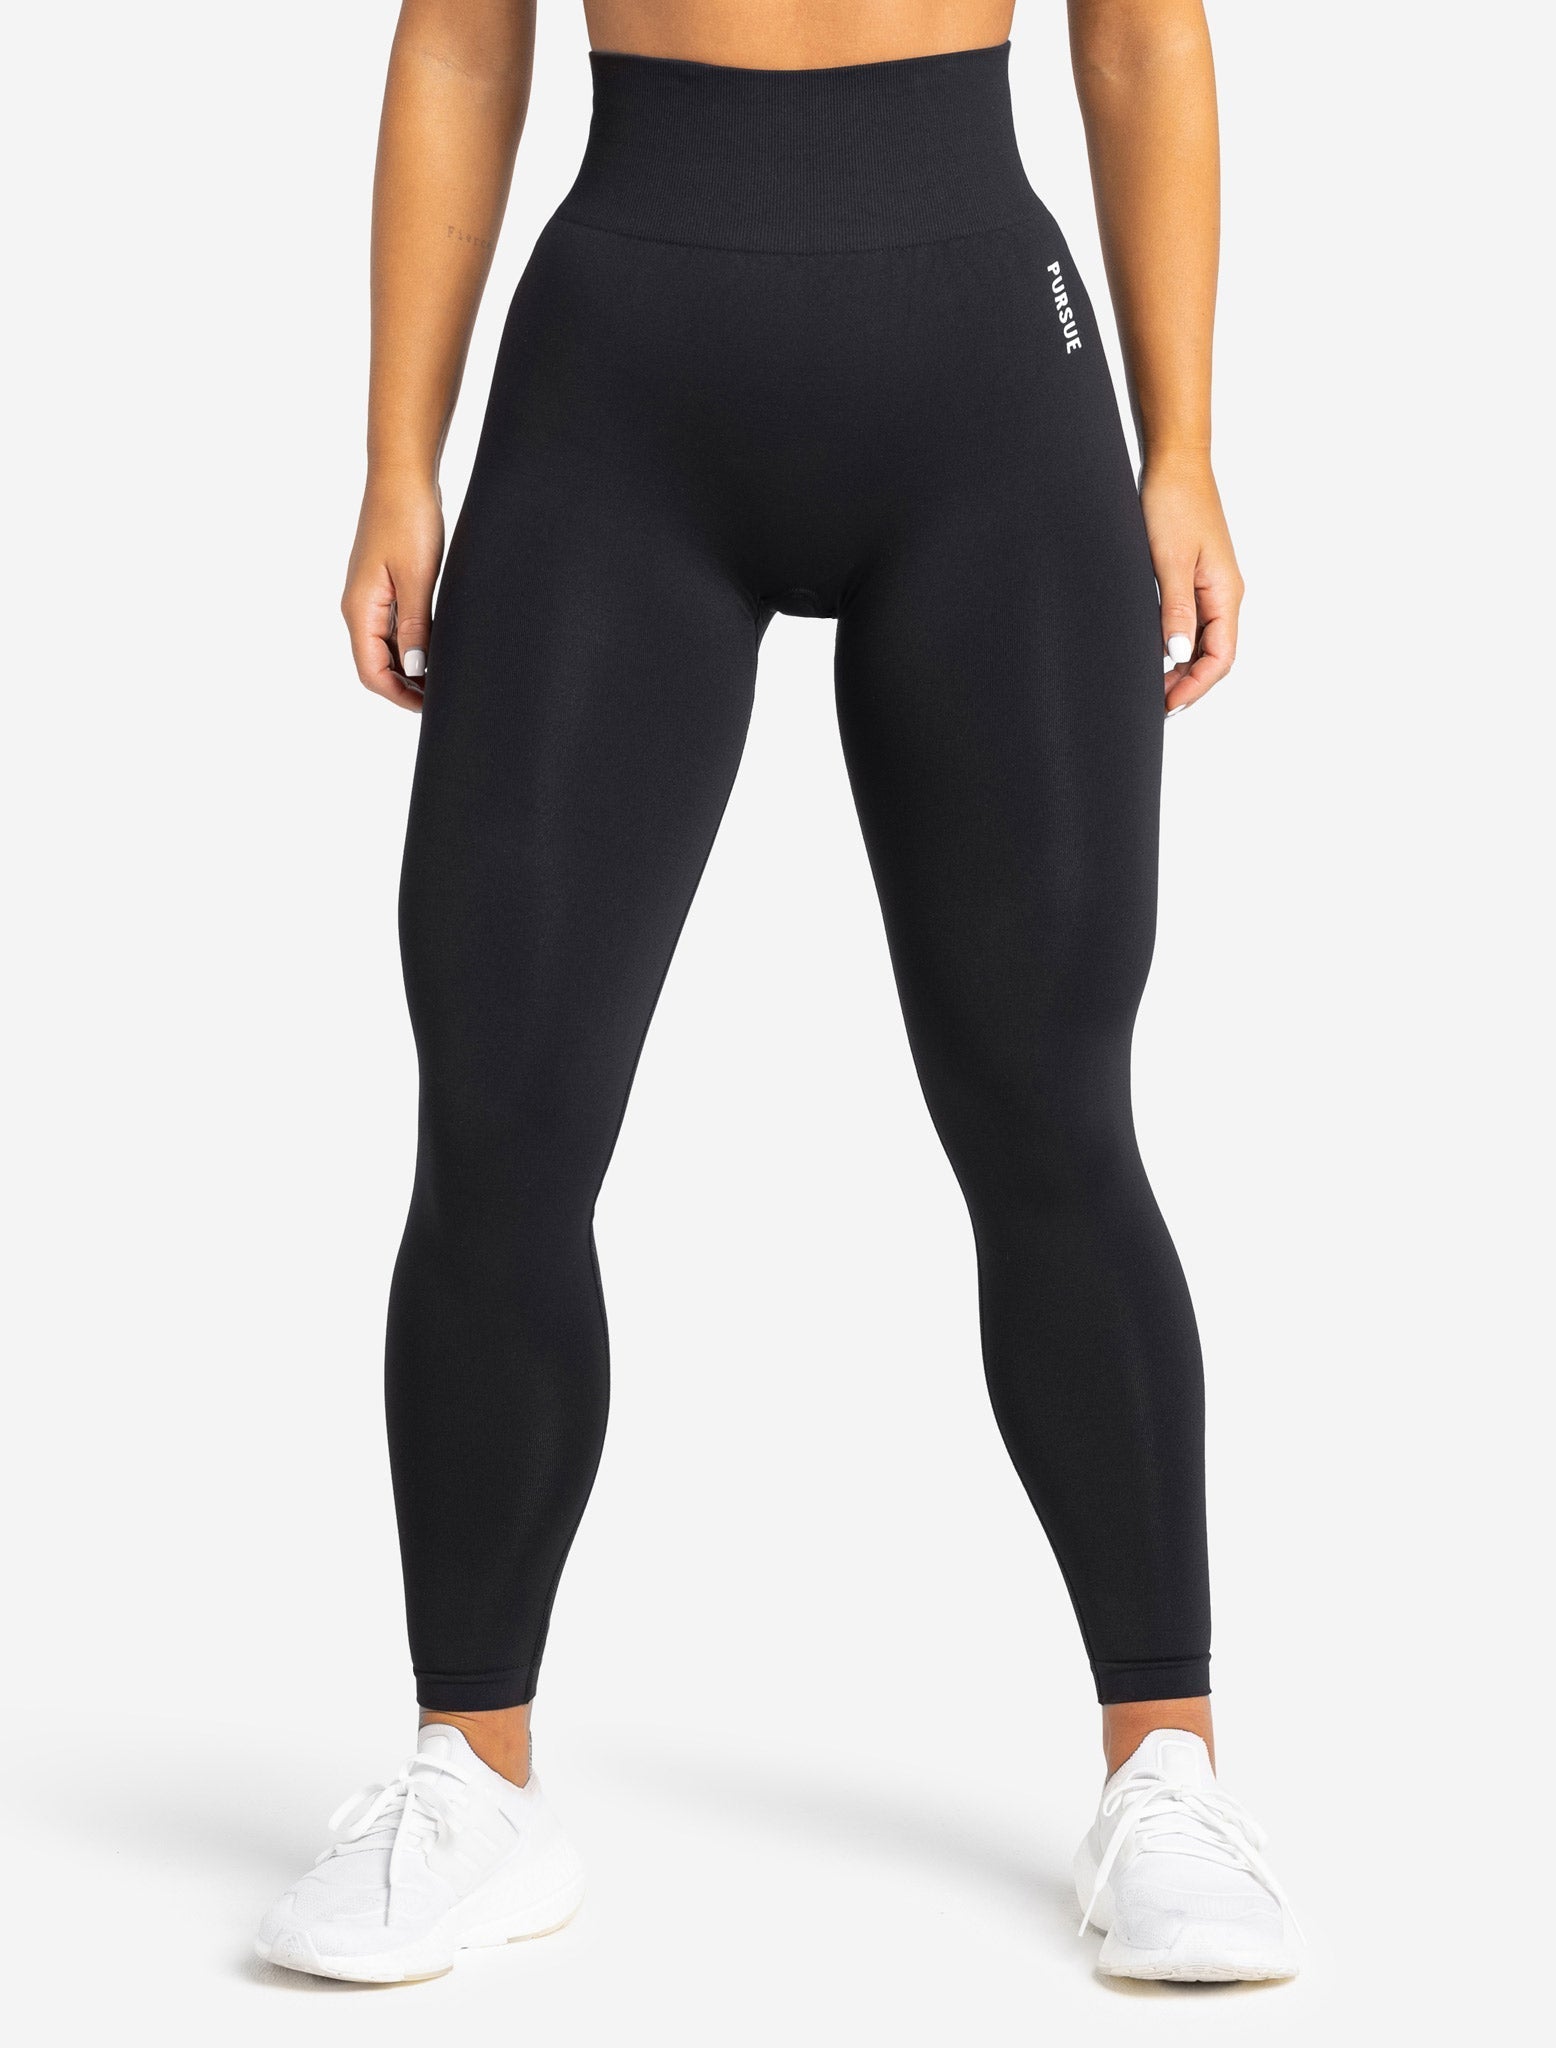 Why Are My Gym Leggings See-Through When I Bend Over? | Fitness Blog –  GymWear UK